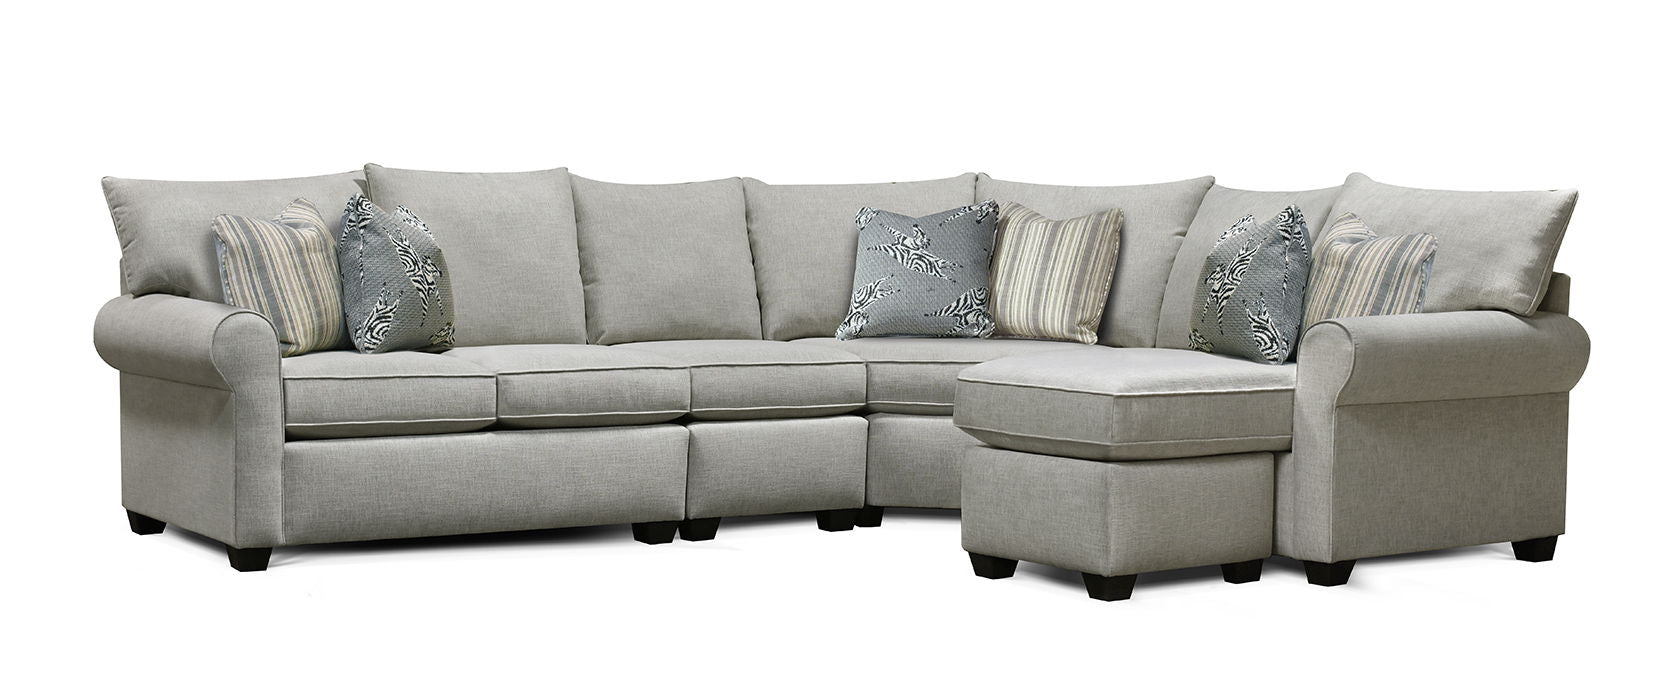 Hayes - 4450 - 5 PC Sectional